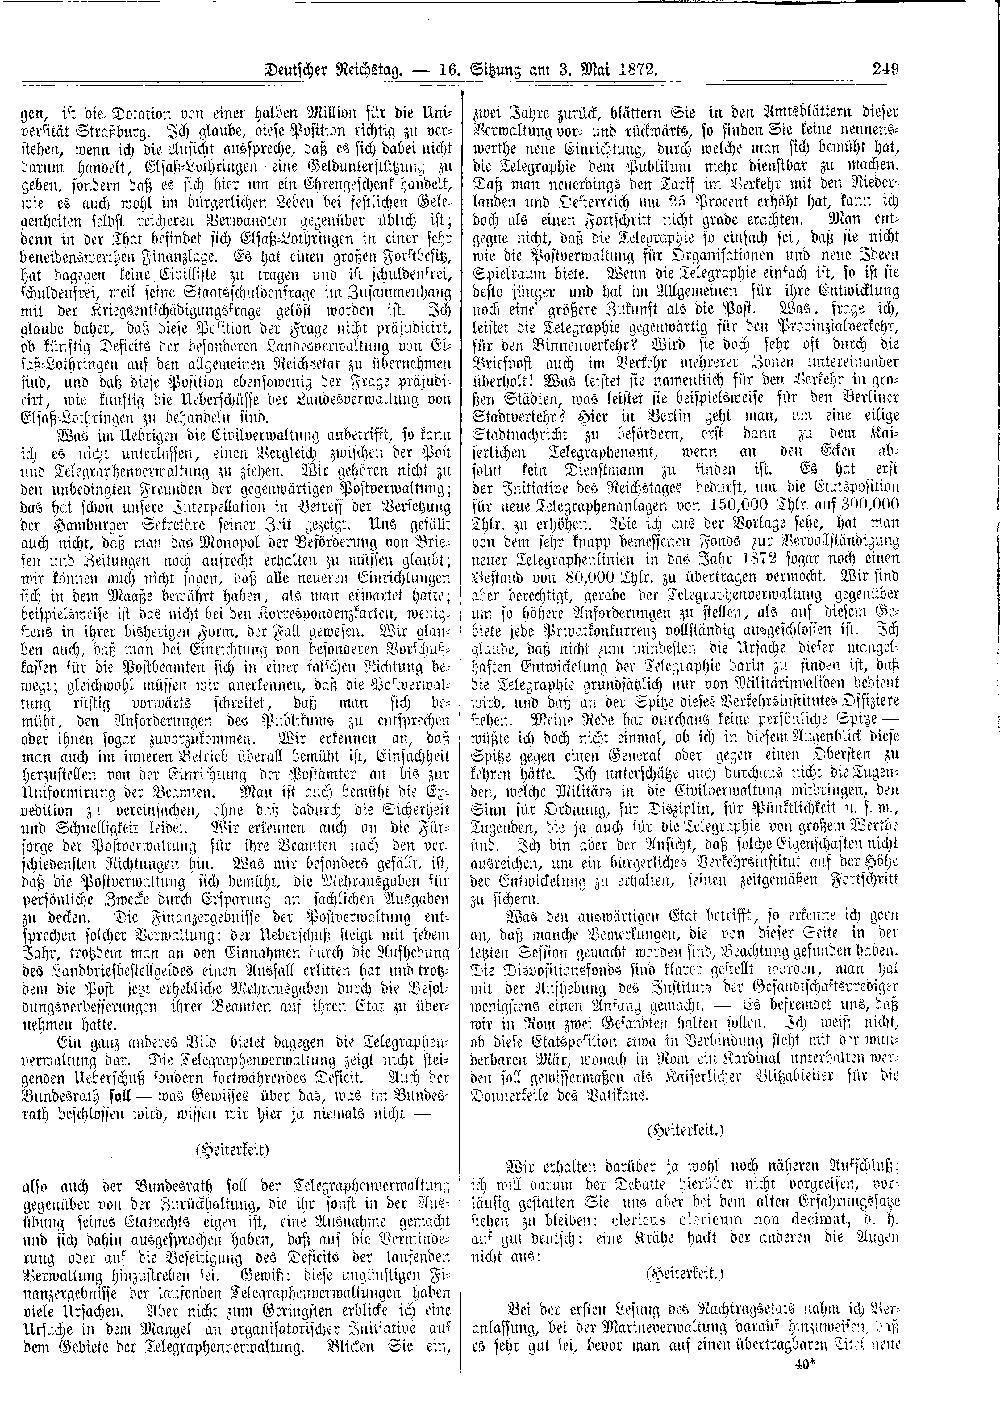 Scan of page 249